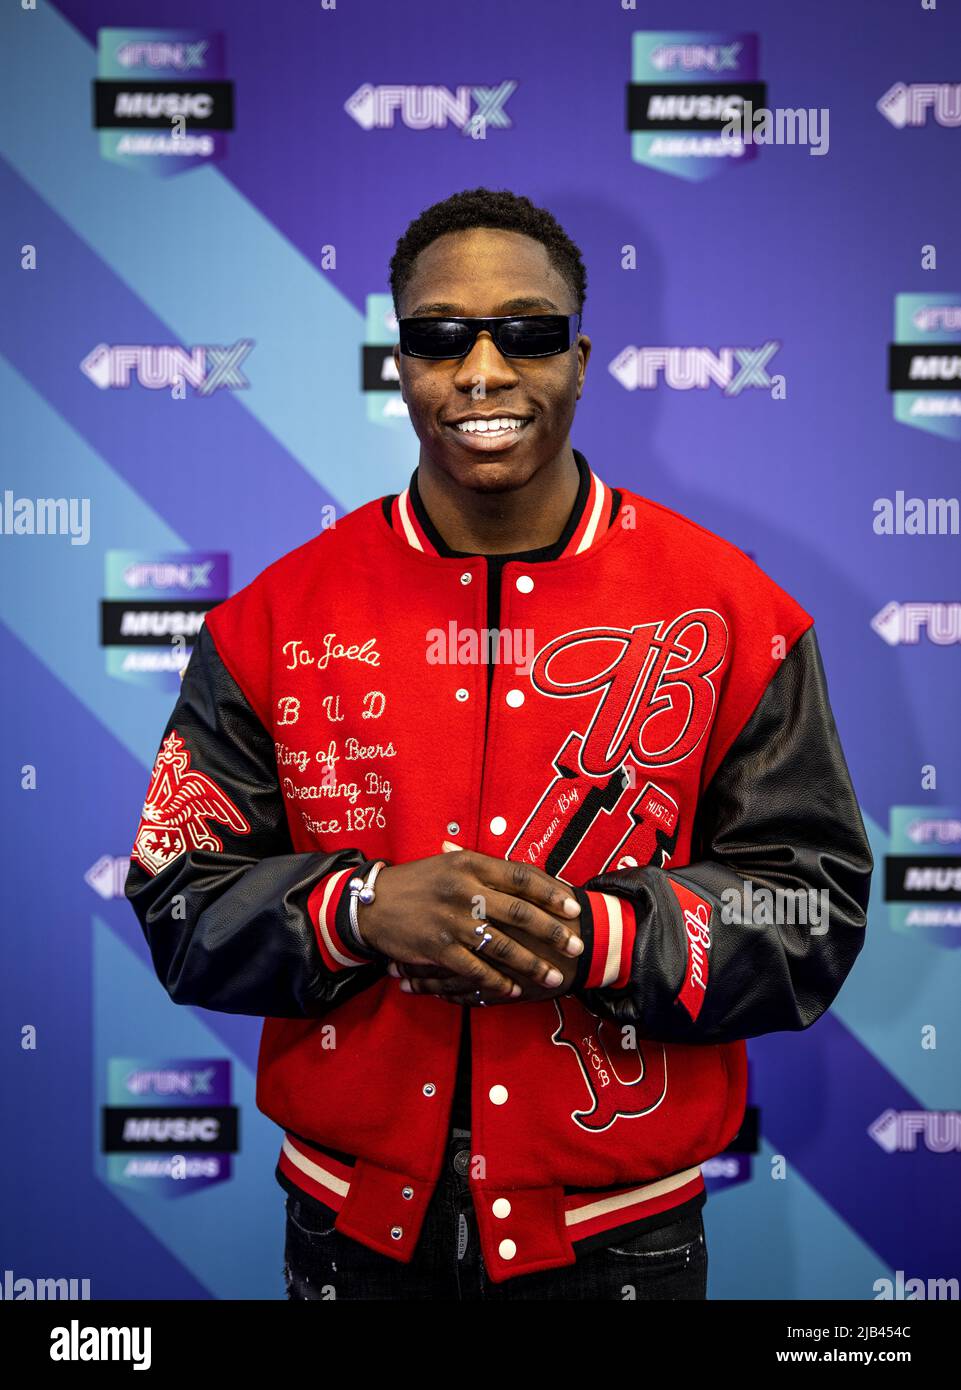 2022-06-02 20:54:53 AMSTERDAM - Ta Joela on the purple carpet for the FunX Music Awards in AFAS Live in Amsterdam. During the award show, the most important music prizes of the young Netherlands are presented. ANP RAMON VAN FLYMEN netherlands out - belgium out Stock Photo